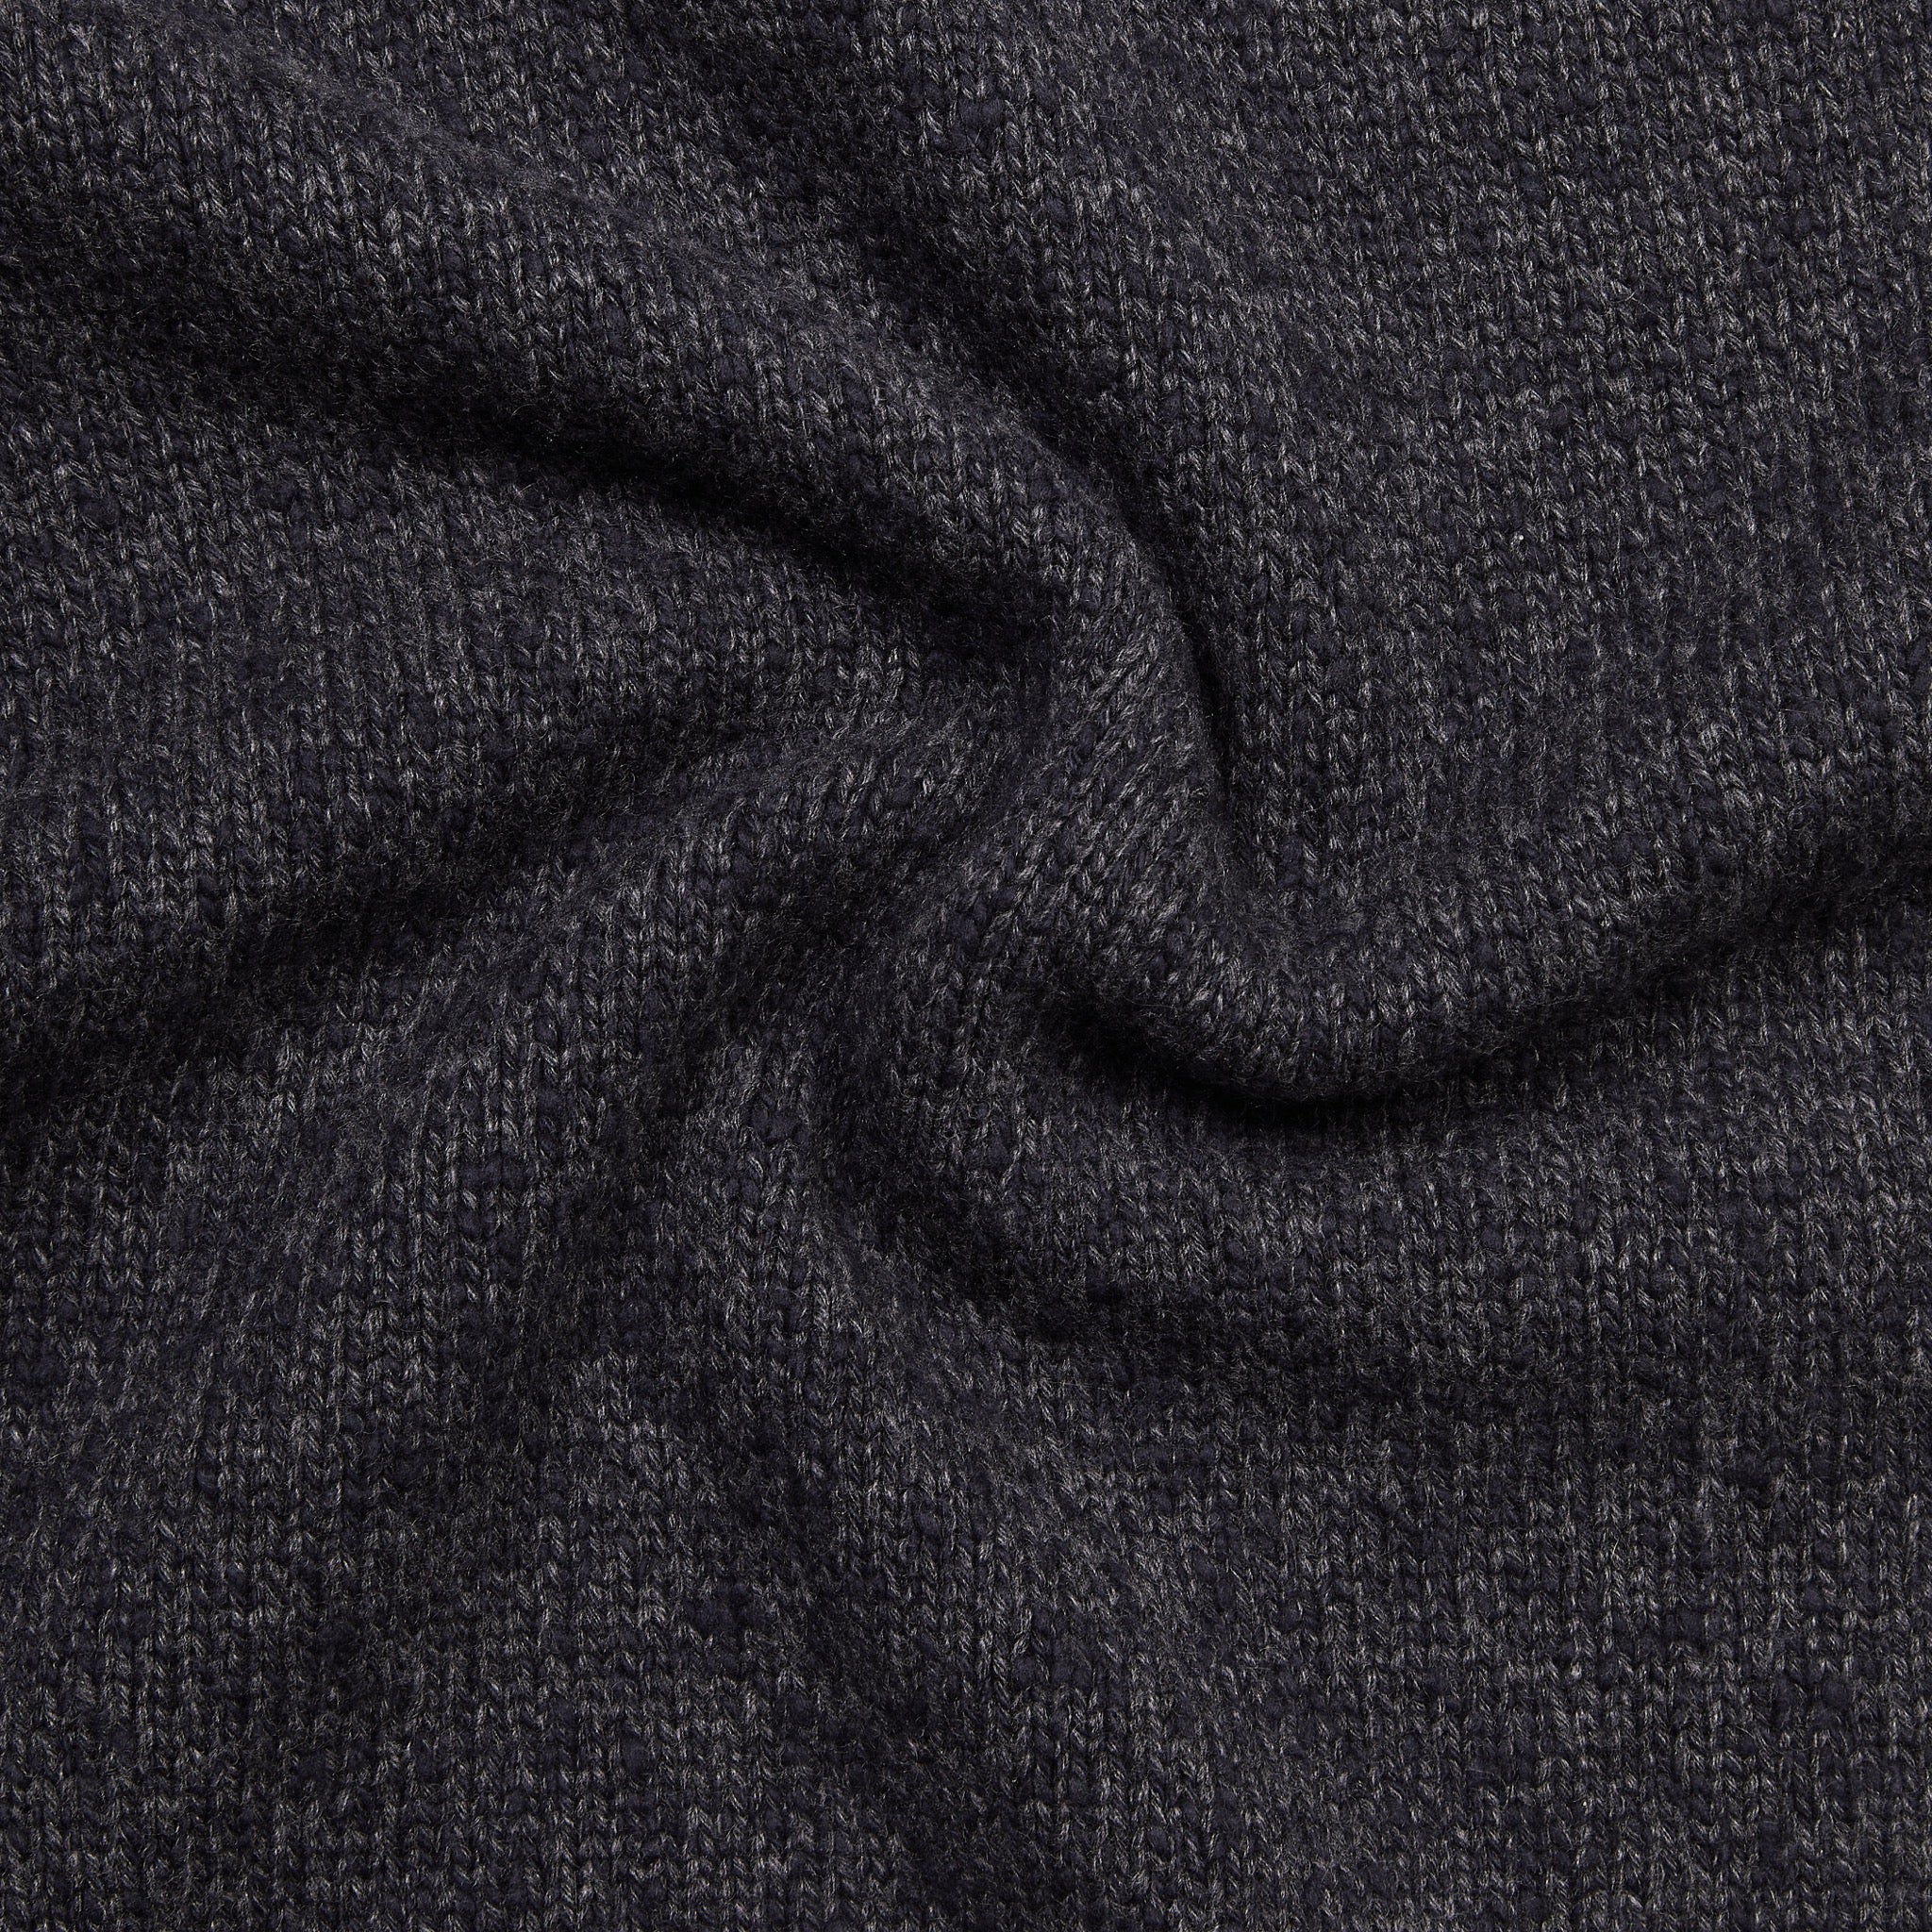 Cashmere wool captain's funnel neck sweater in charcoal